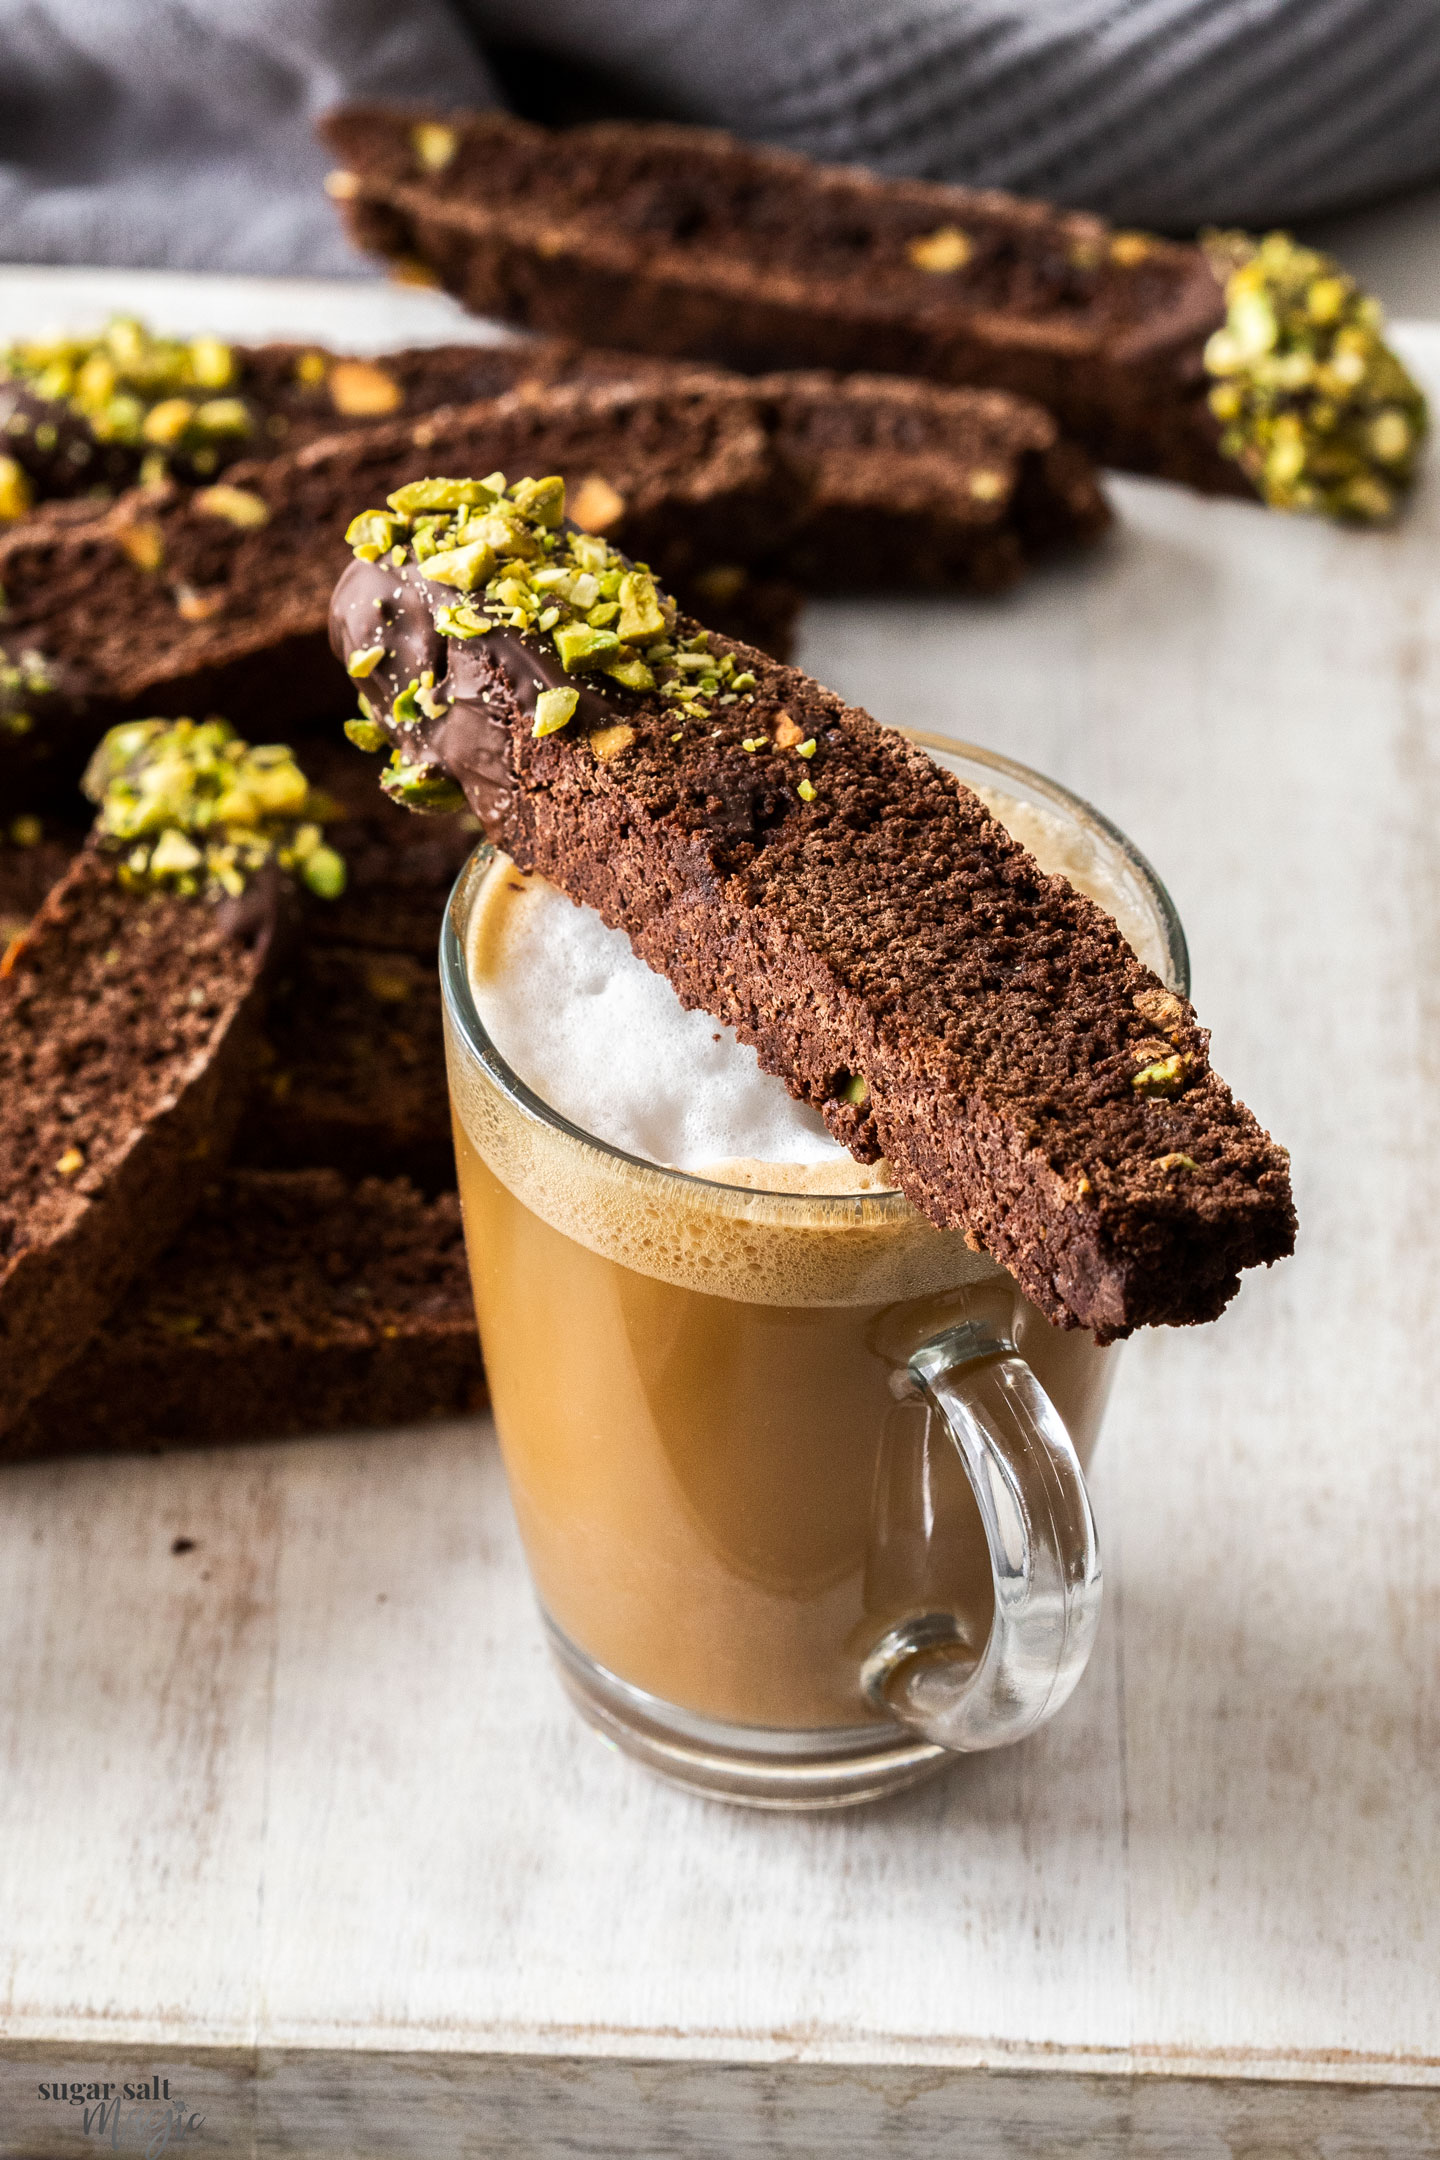 A chocolate biscotti sitting on a cup of coffee.